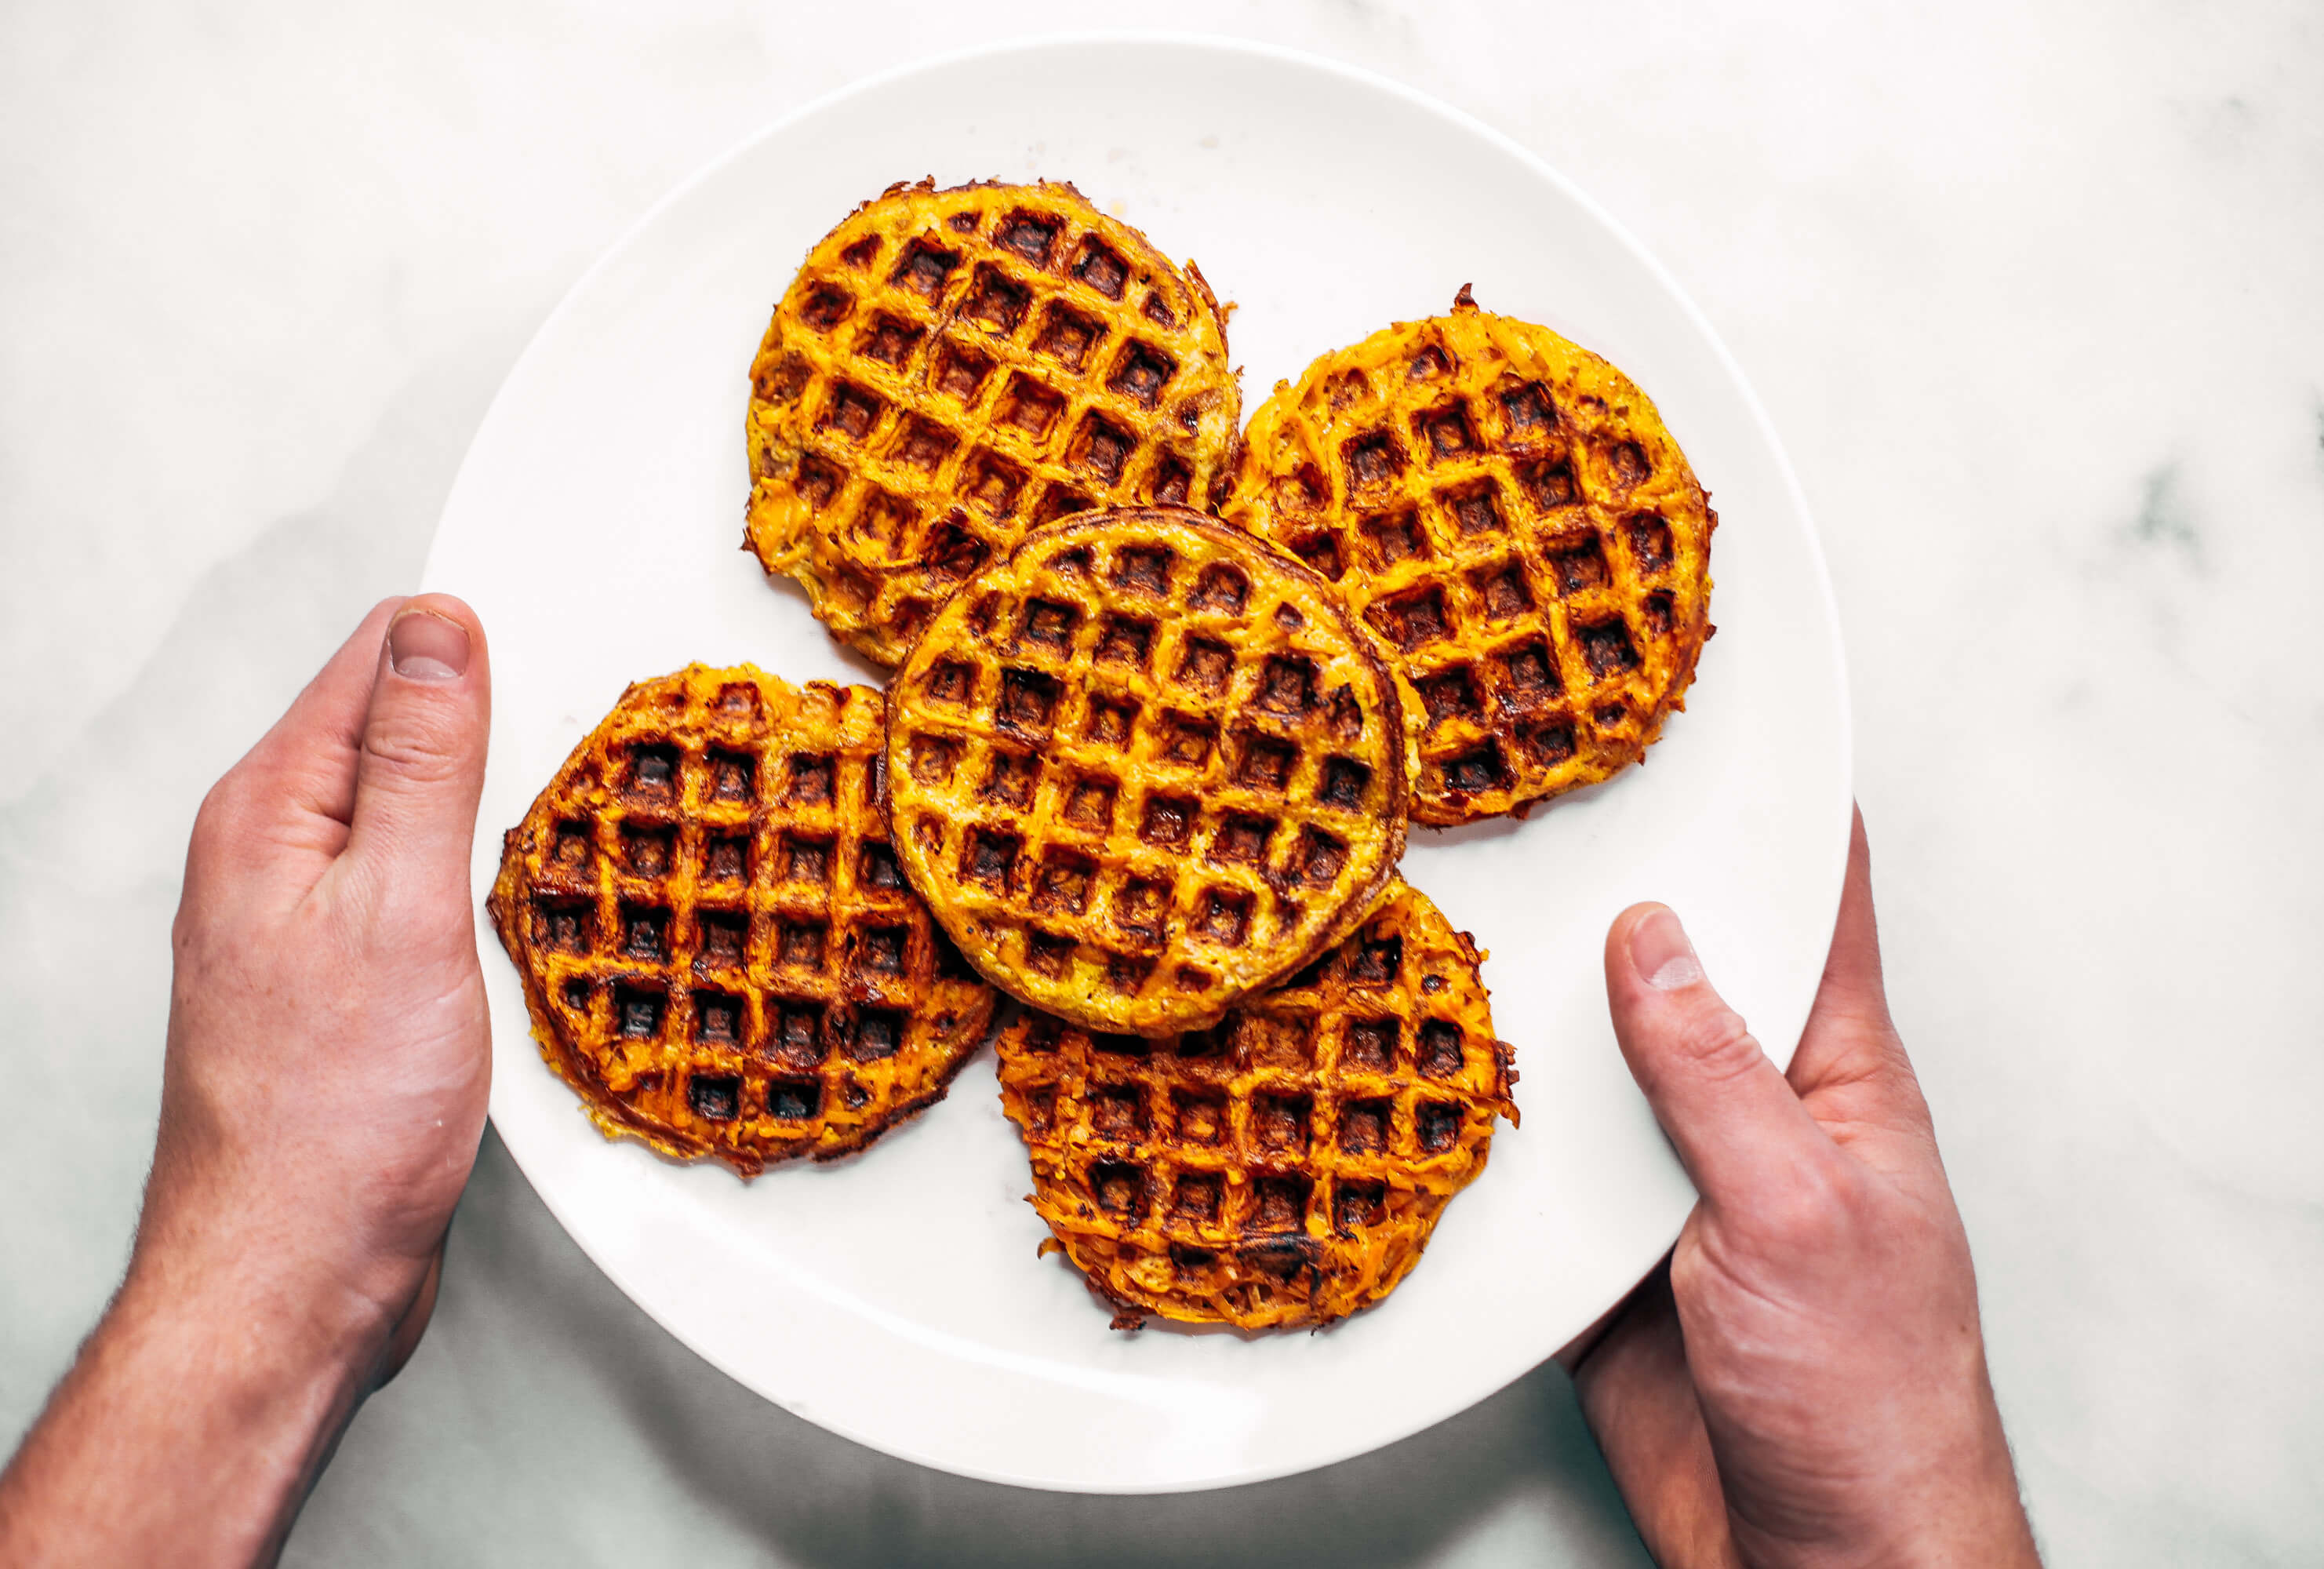 Sweet potato waffles made with two ingredients and ready in just five minutes! These sweet potato waffles are better than Eggos and can be made ahead and frozen for quick meal prep. Best paleo waffles for healthy eaters. Easy gluten free waffles for everyone!